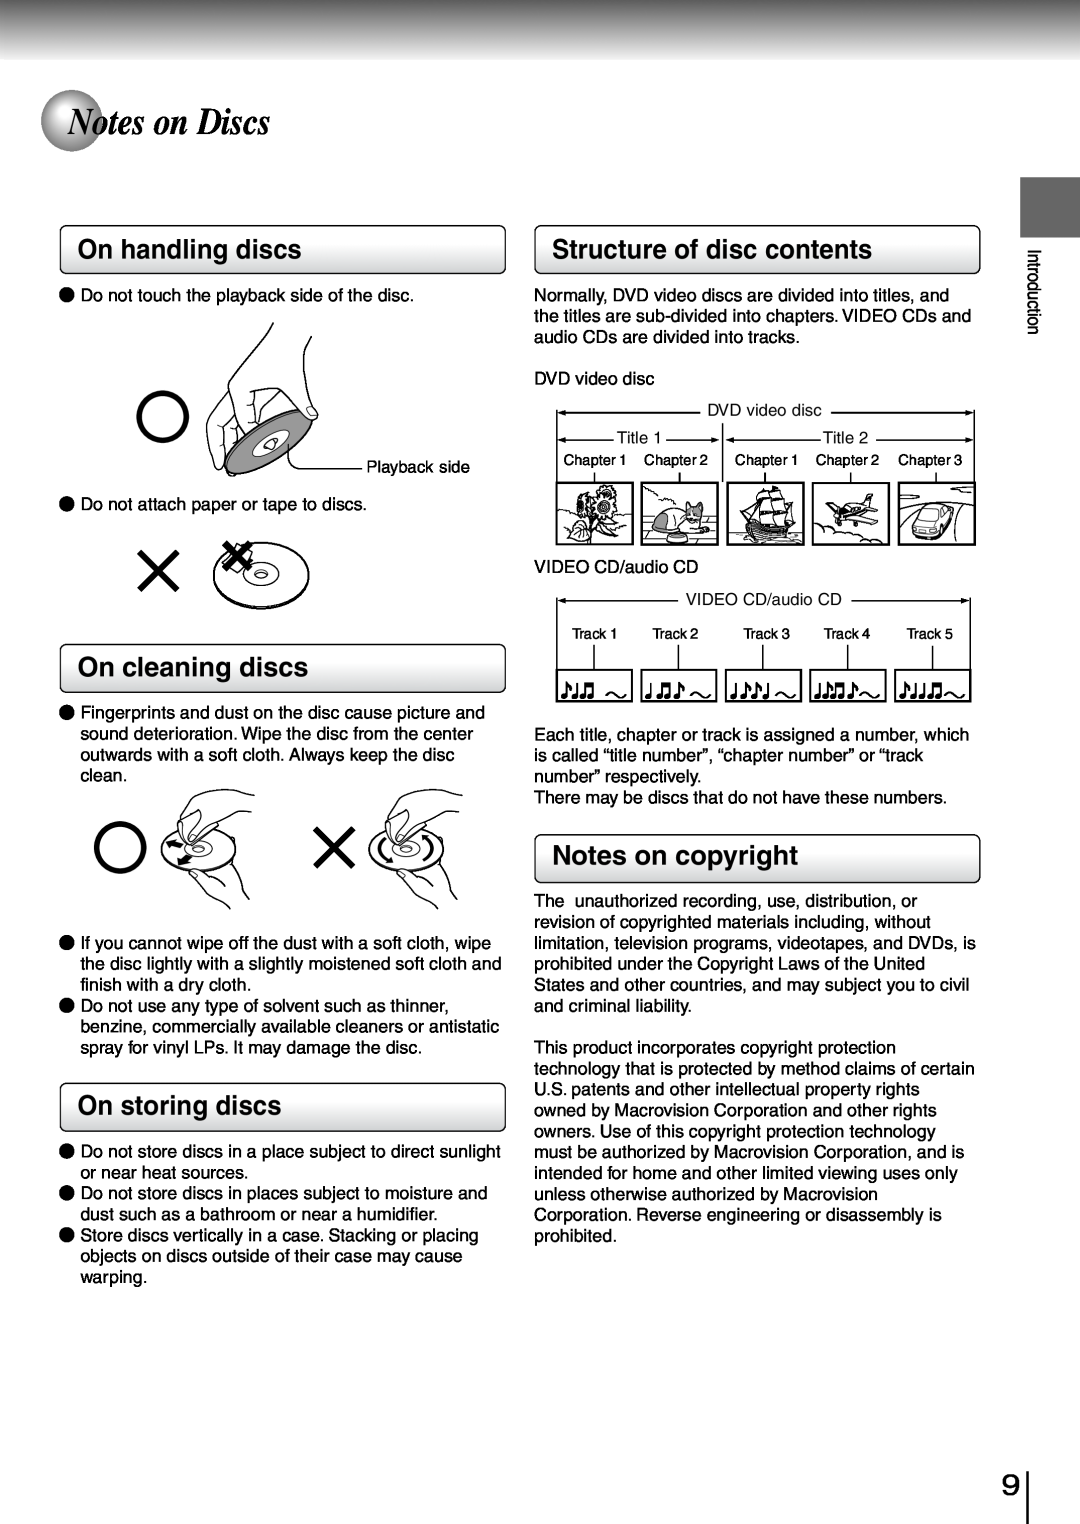 Toshiba SD-260SV manual Notes on Discs, On handling discs, On cleaning discs, Structure of disc contents, On storing discs 